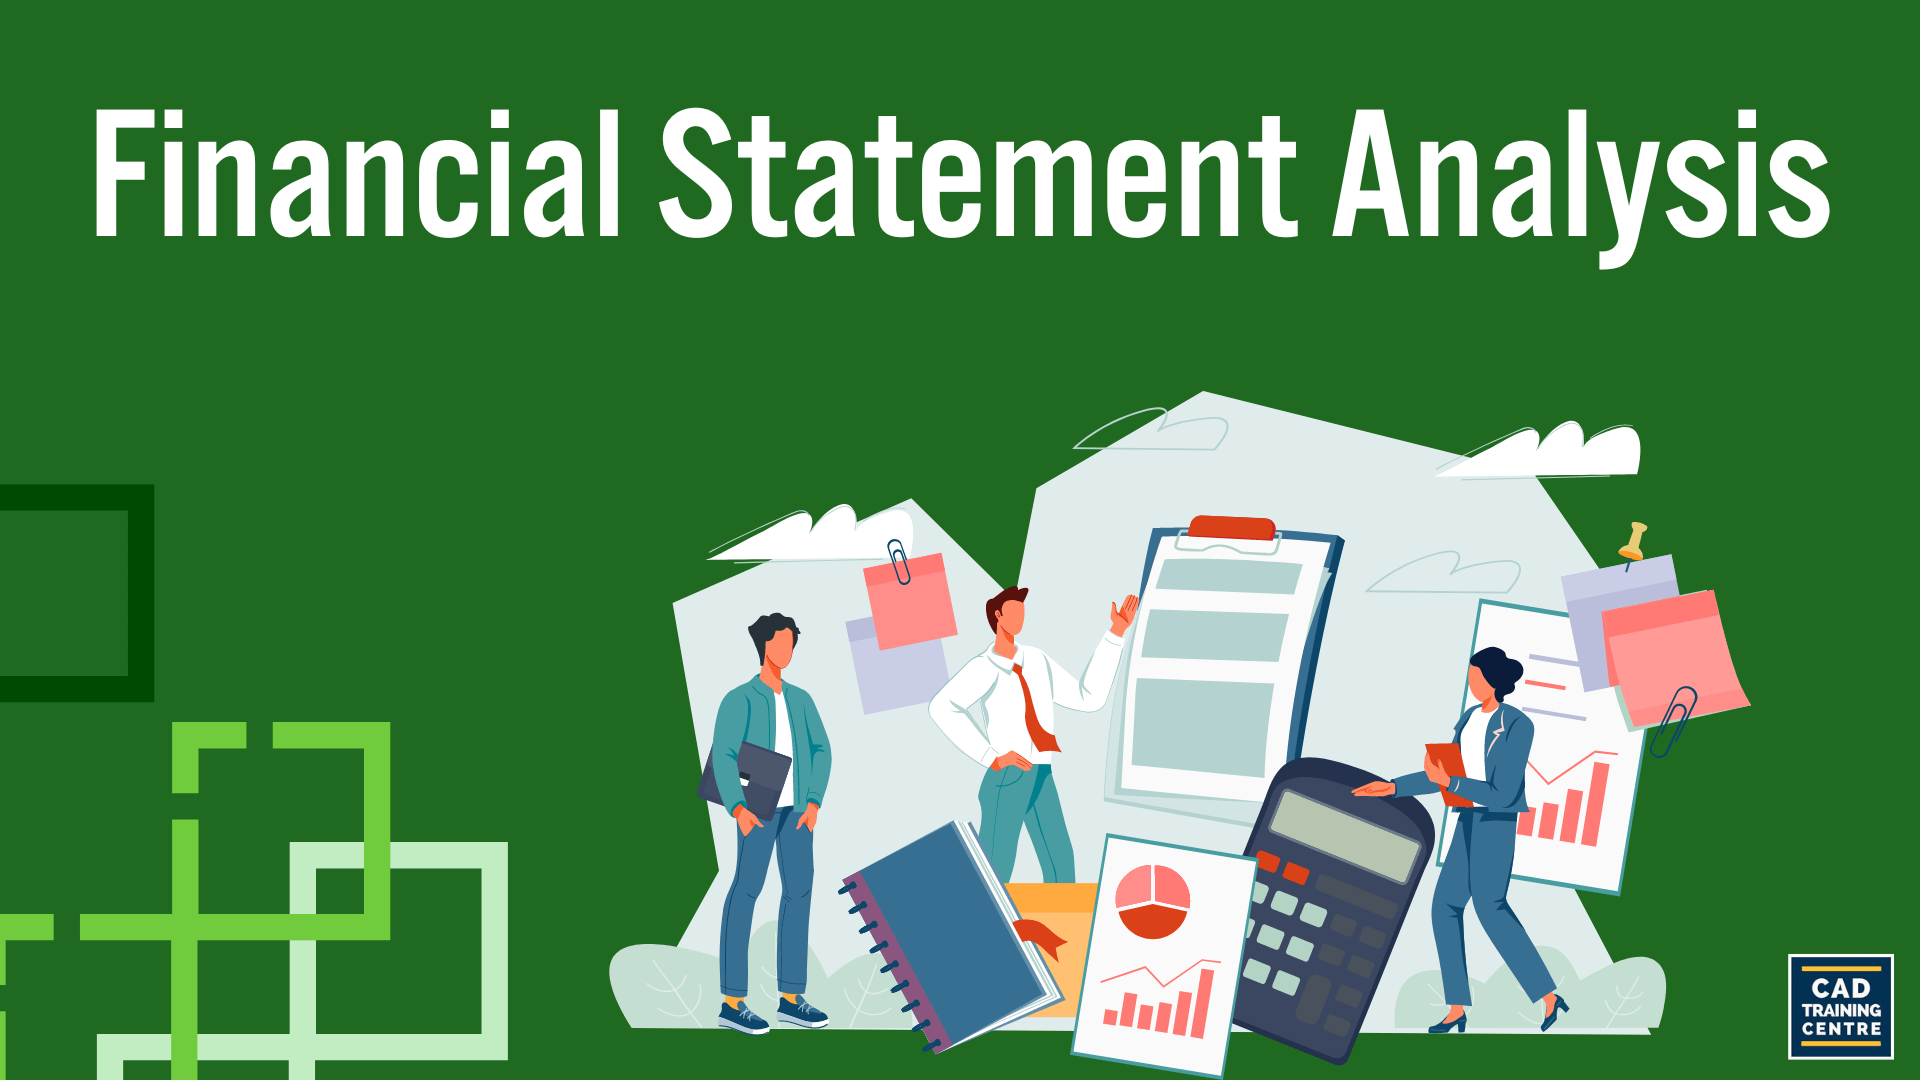 Come and learn financial statement analysis 